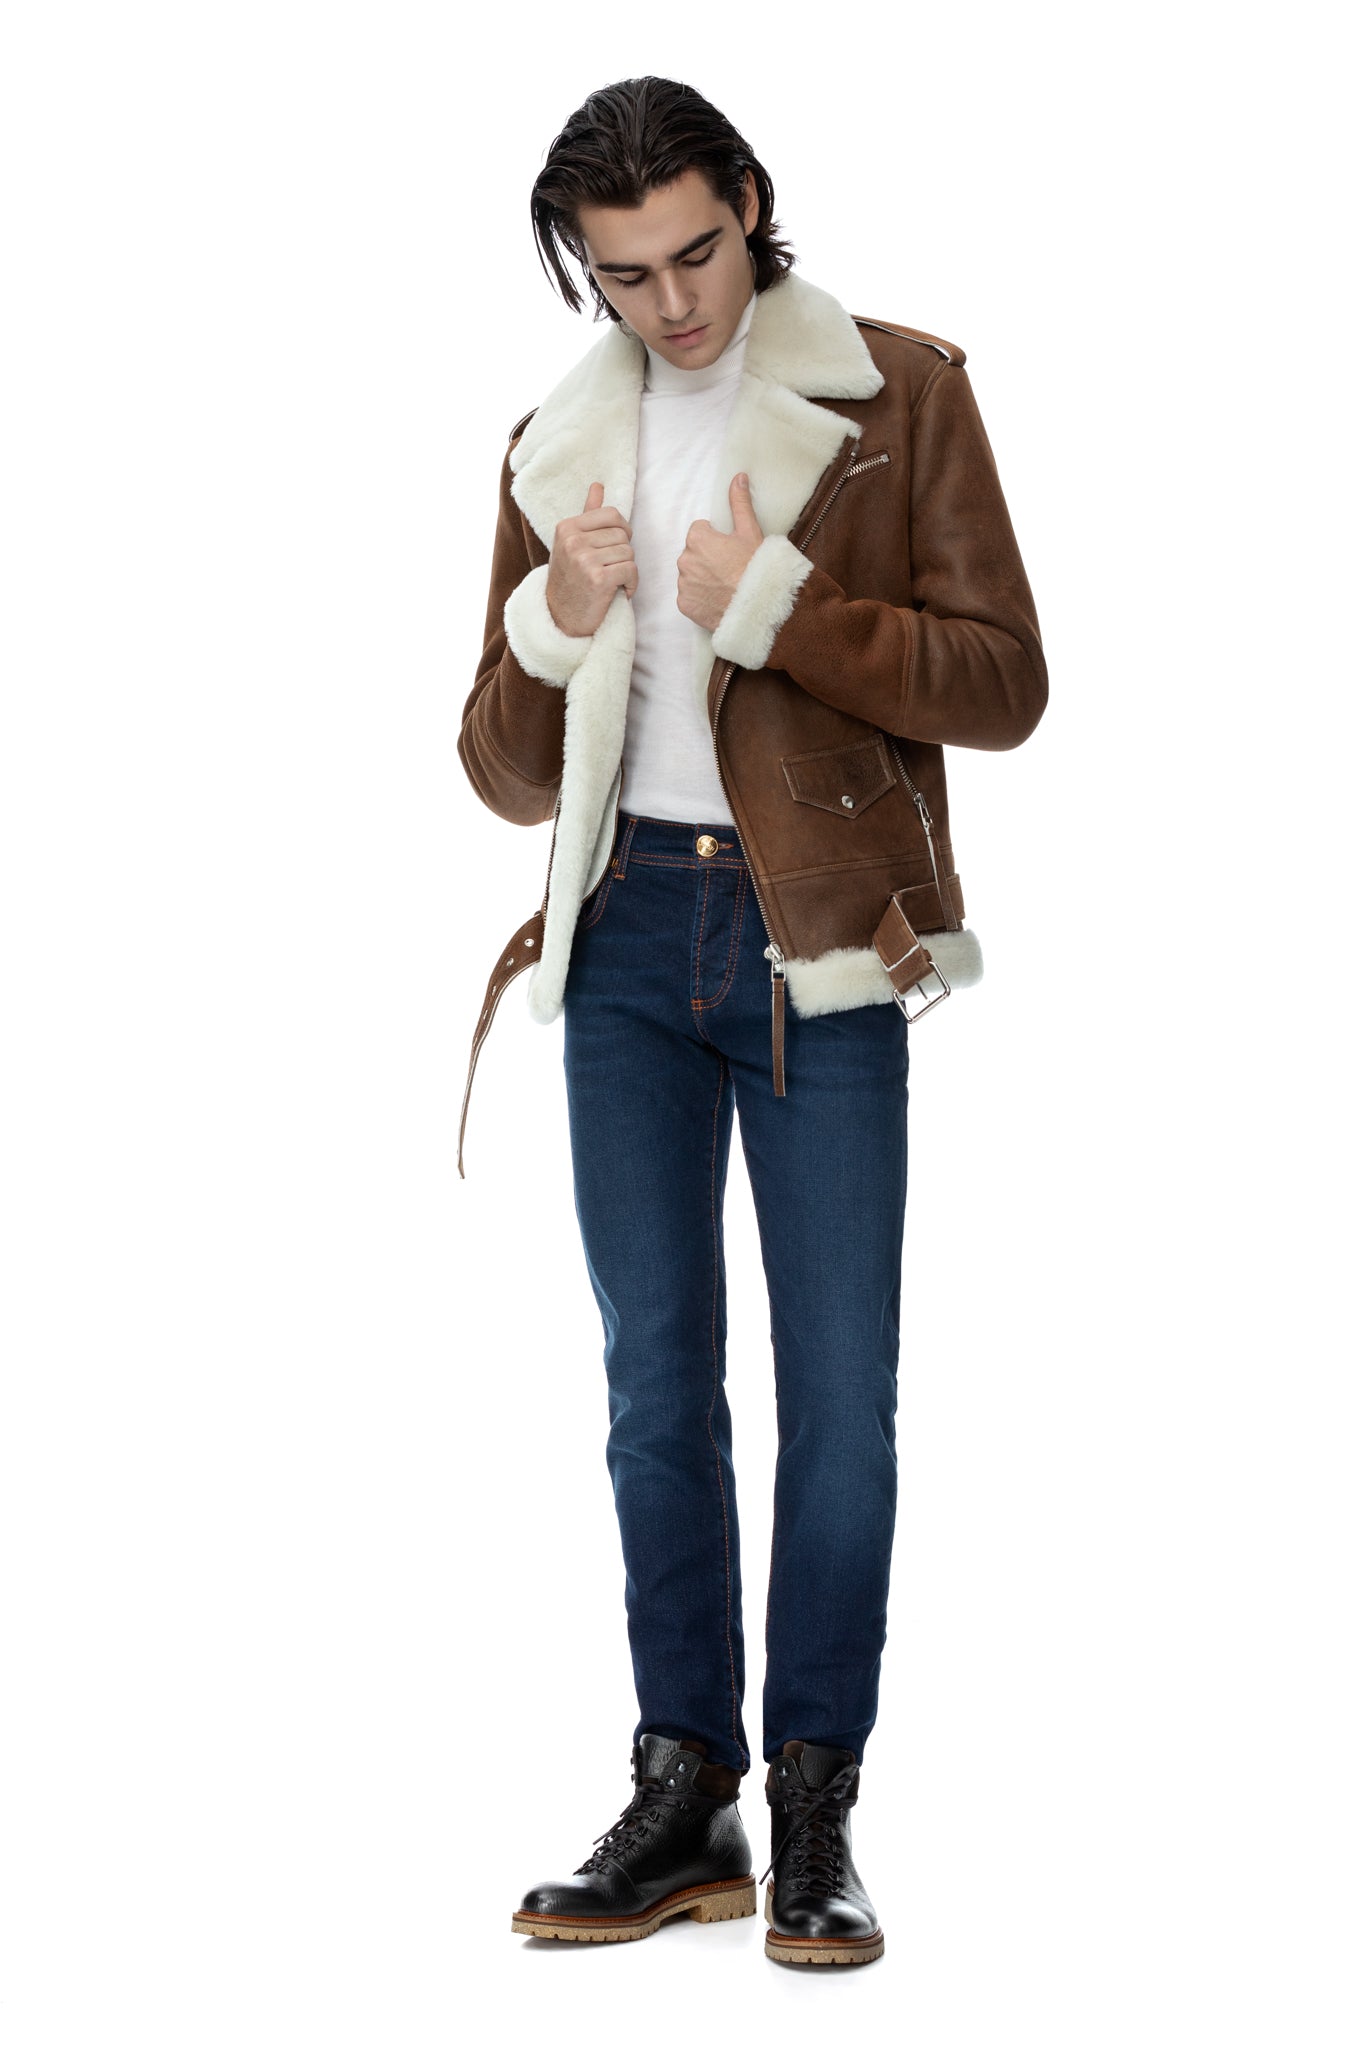 Brown shearling leather jacket